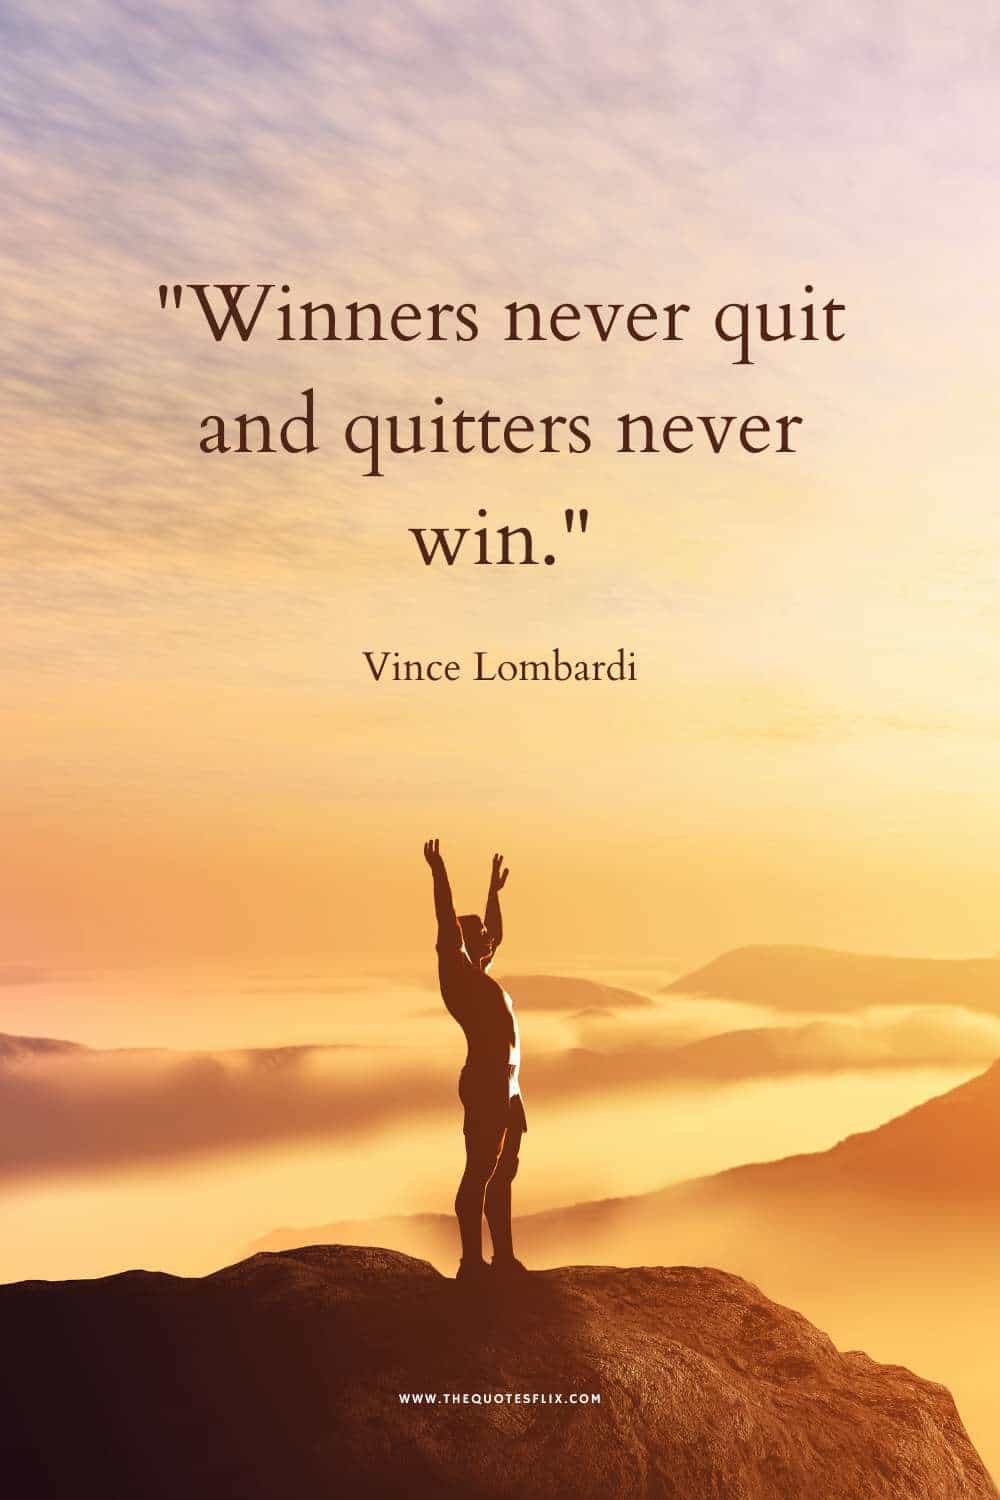 inspirational football quotes - winners never quit quitters never win